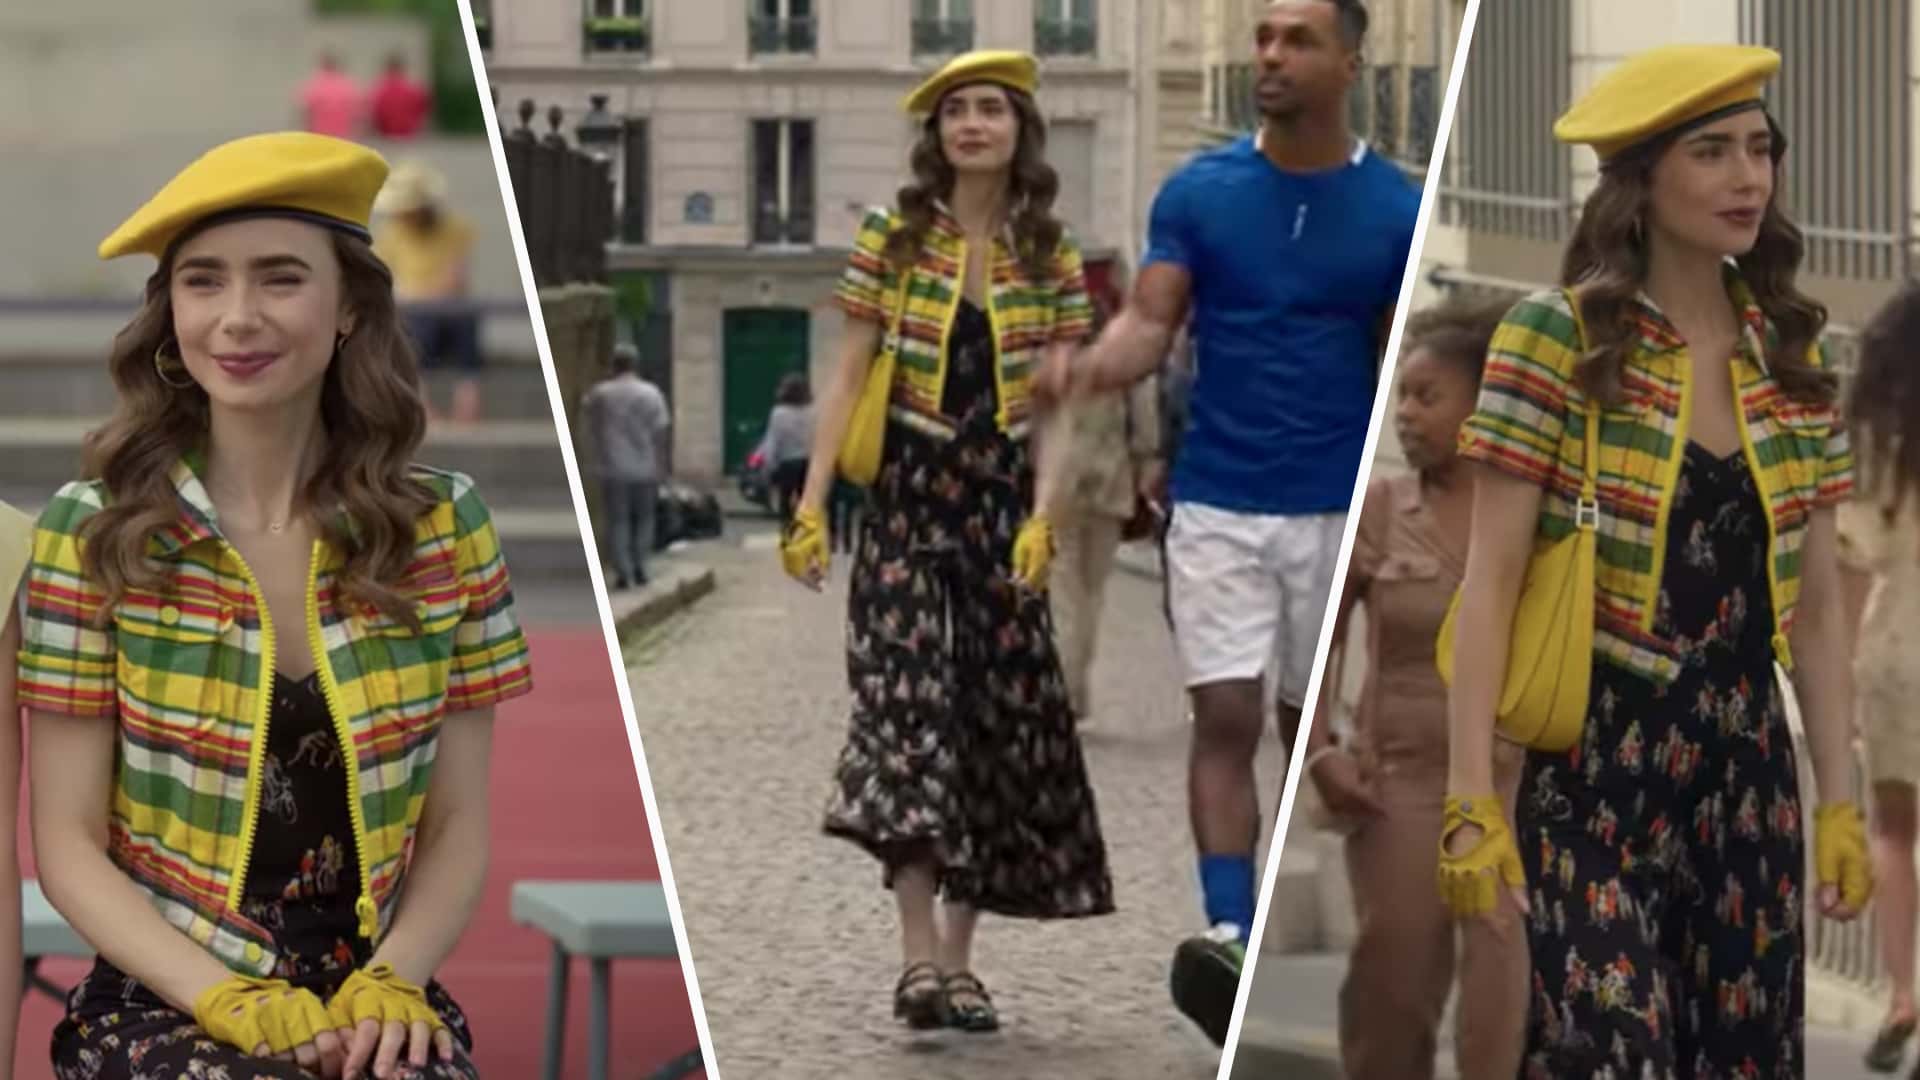 Emily In Paris Fashion: All The Season 2 Outfits and Clothes - Parade